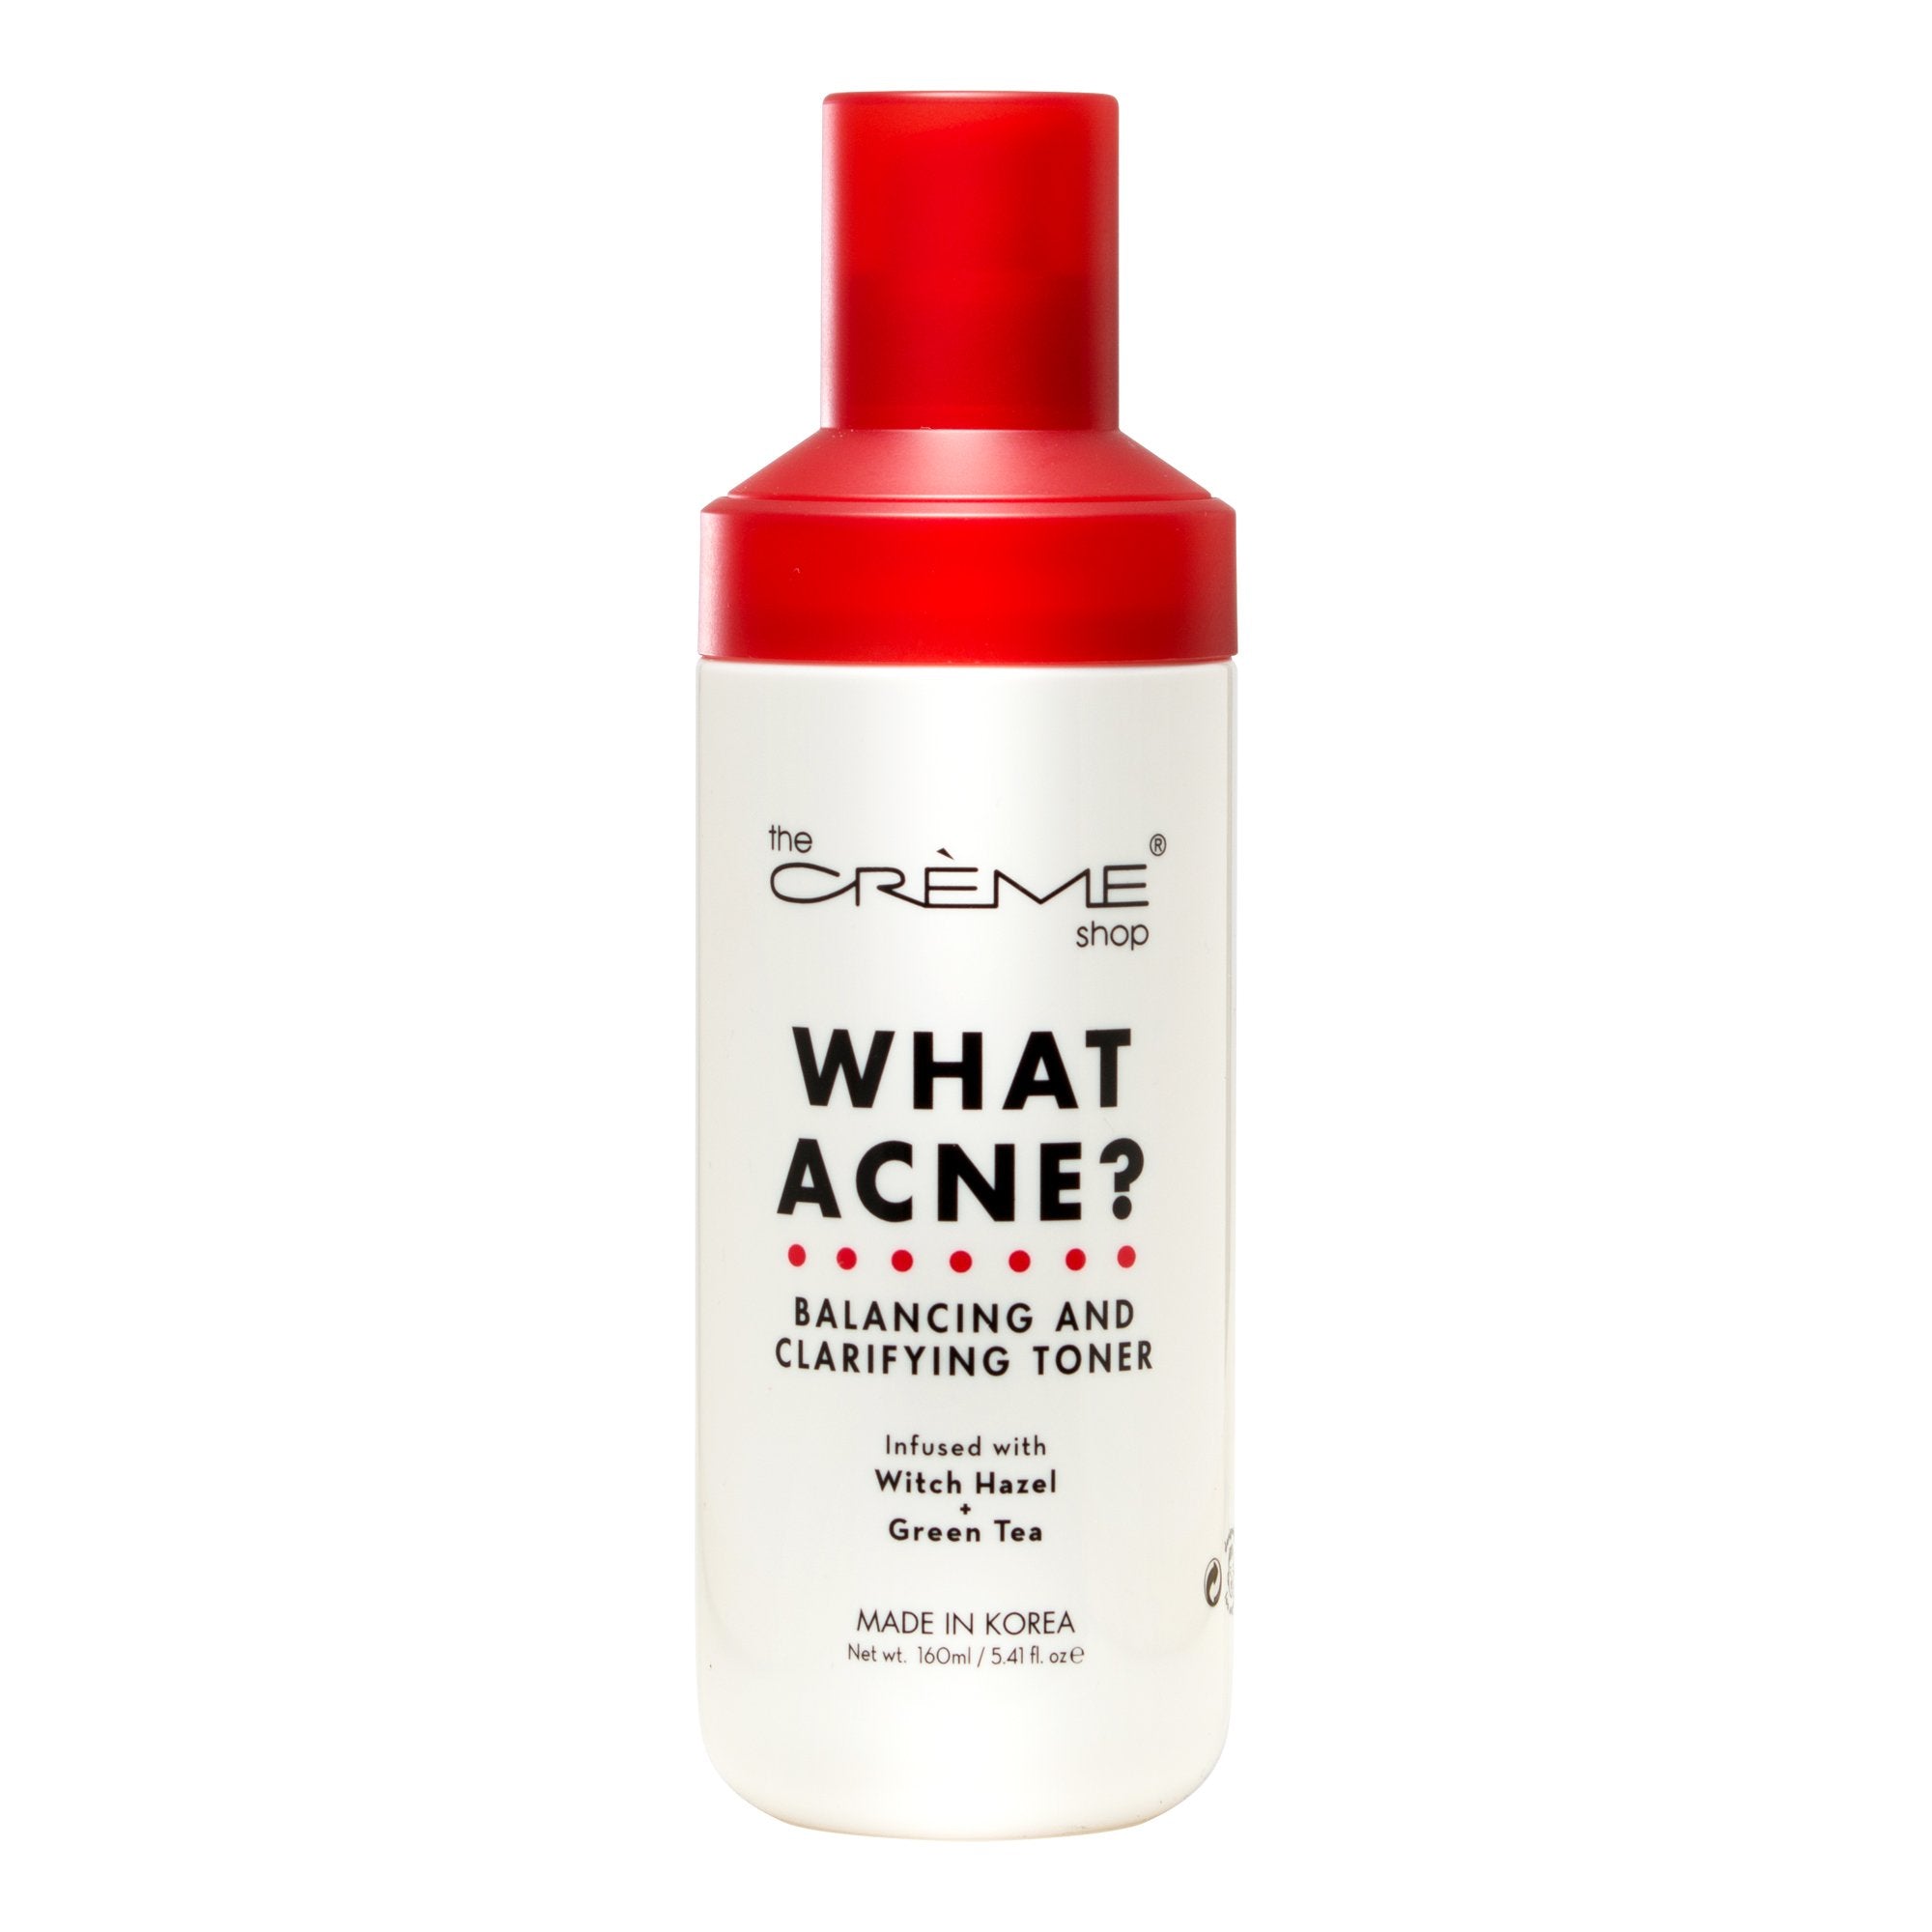 What Acne? - Balancing and Clarifying Toner - The Crème Shop